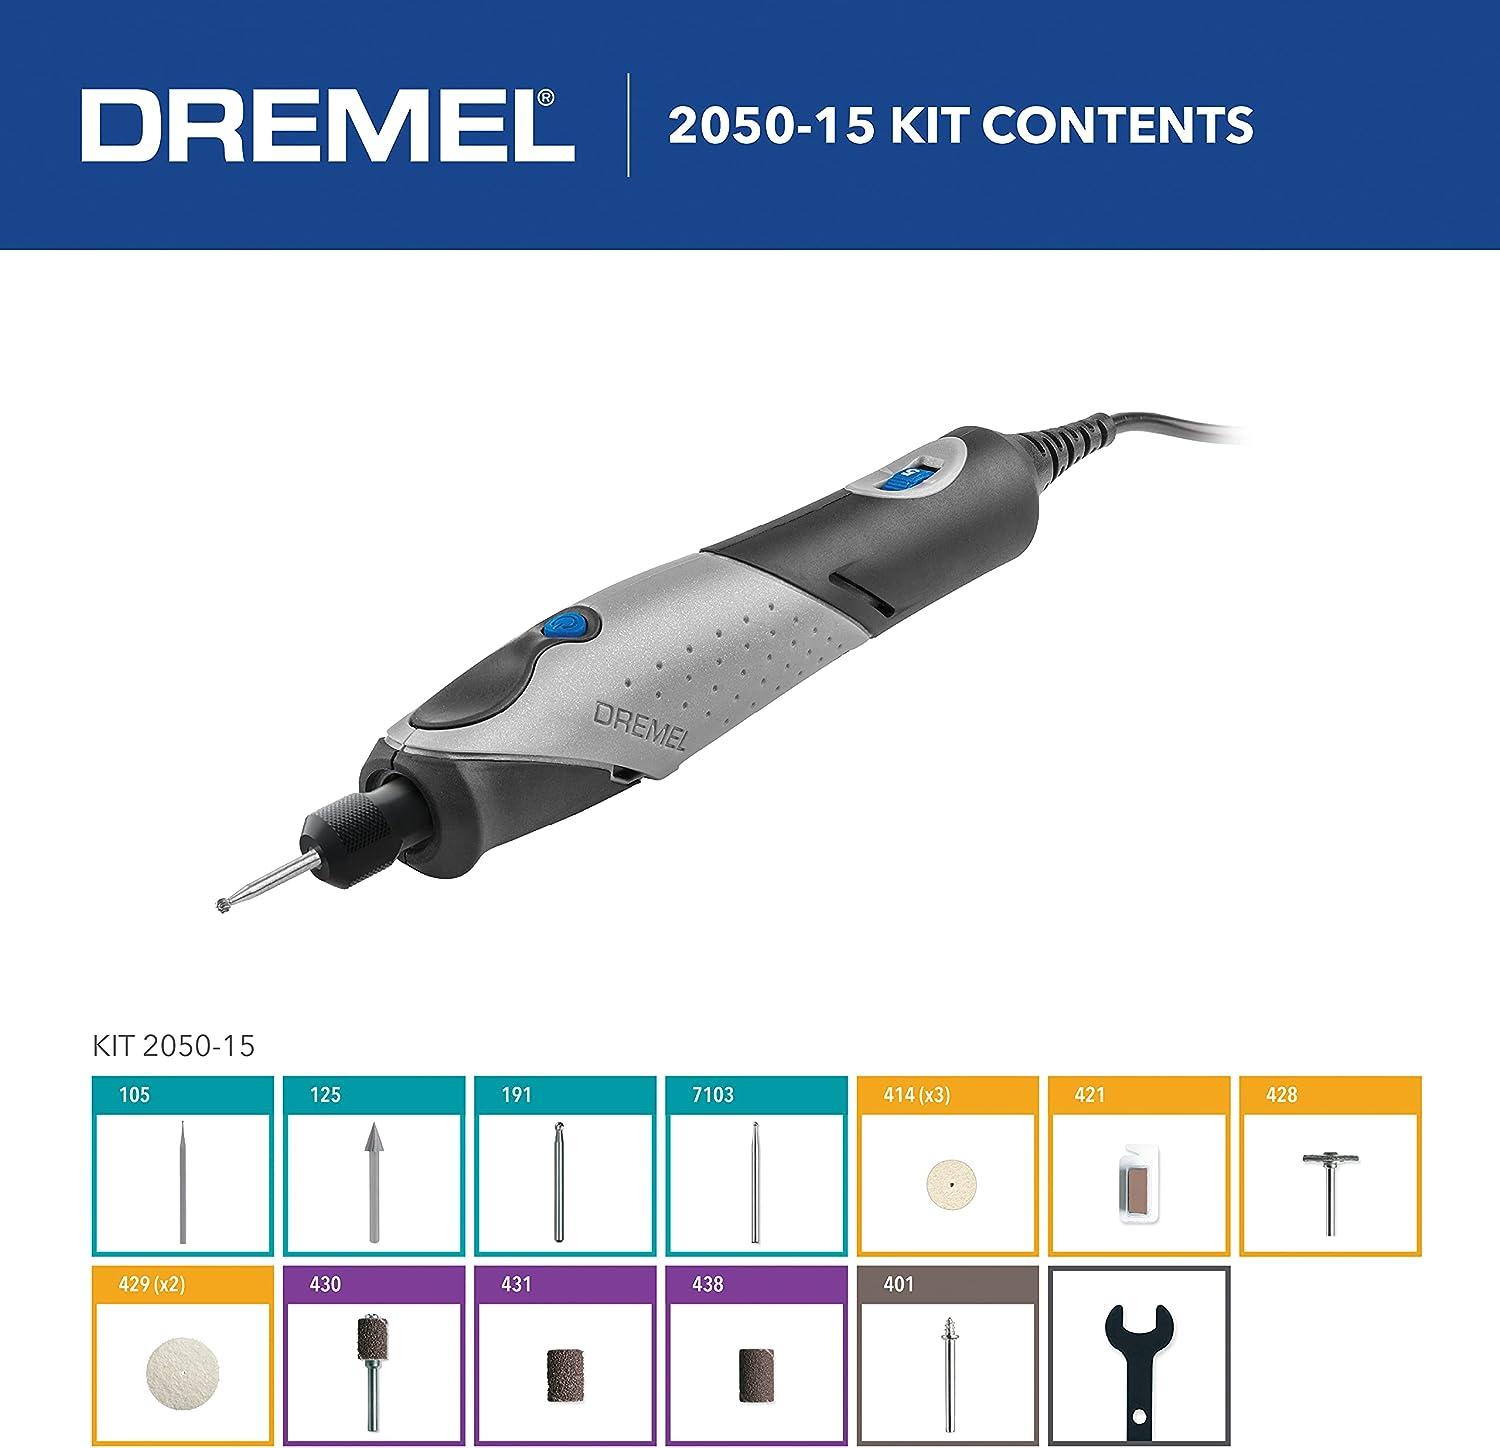 Make Sure You Have the Best Dremel Wood Carving Bits for Woodworking